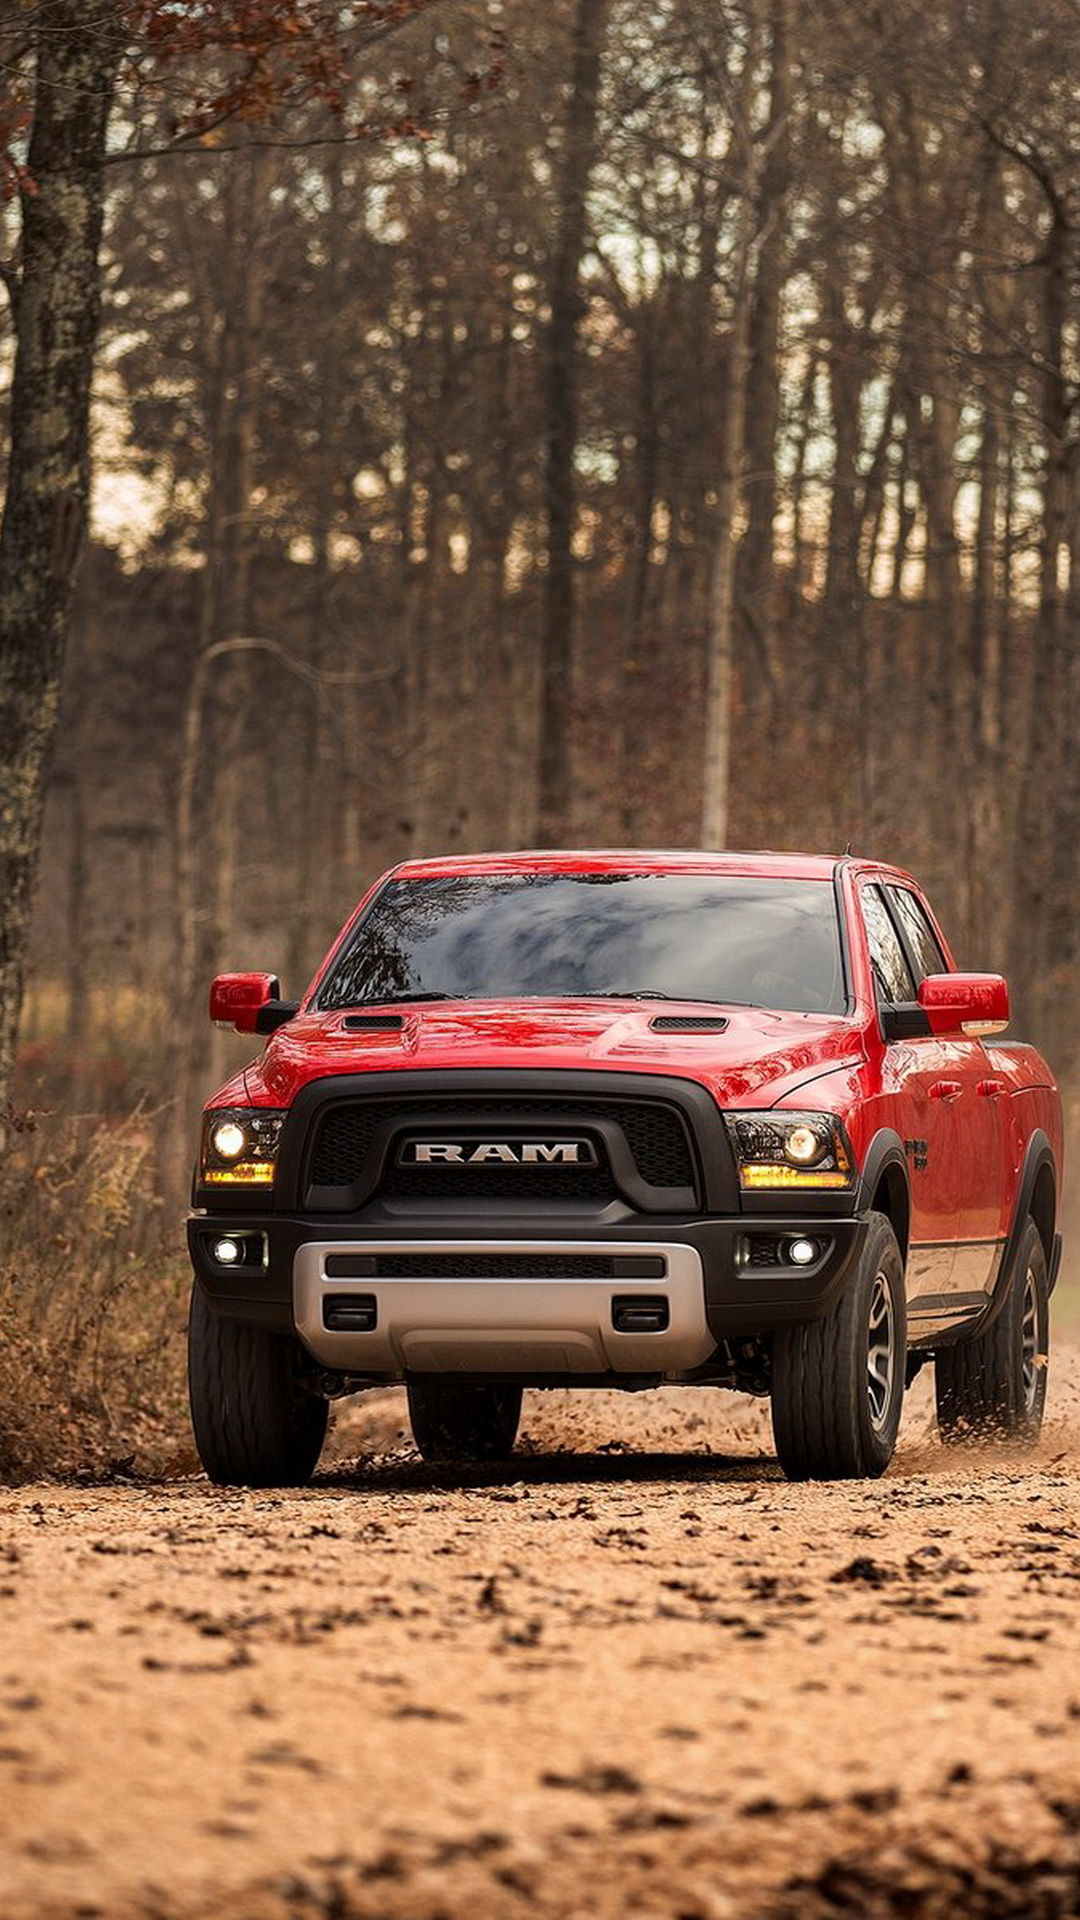 Dodge Ram Rebel iPhone Wallpaper For 4s And 5s